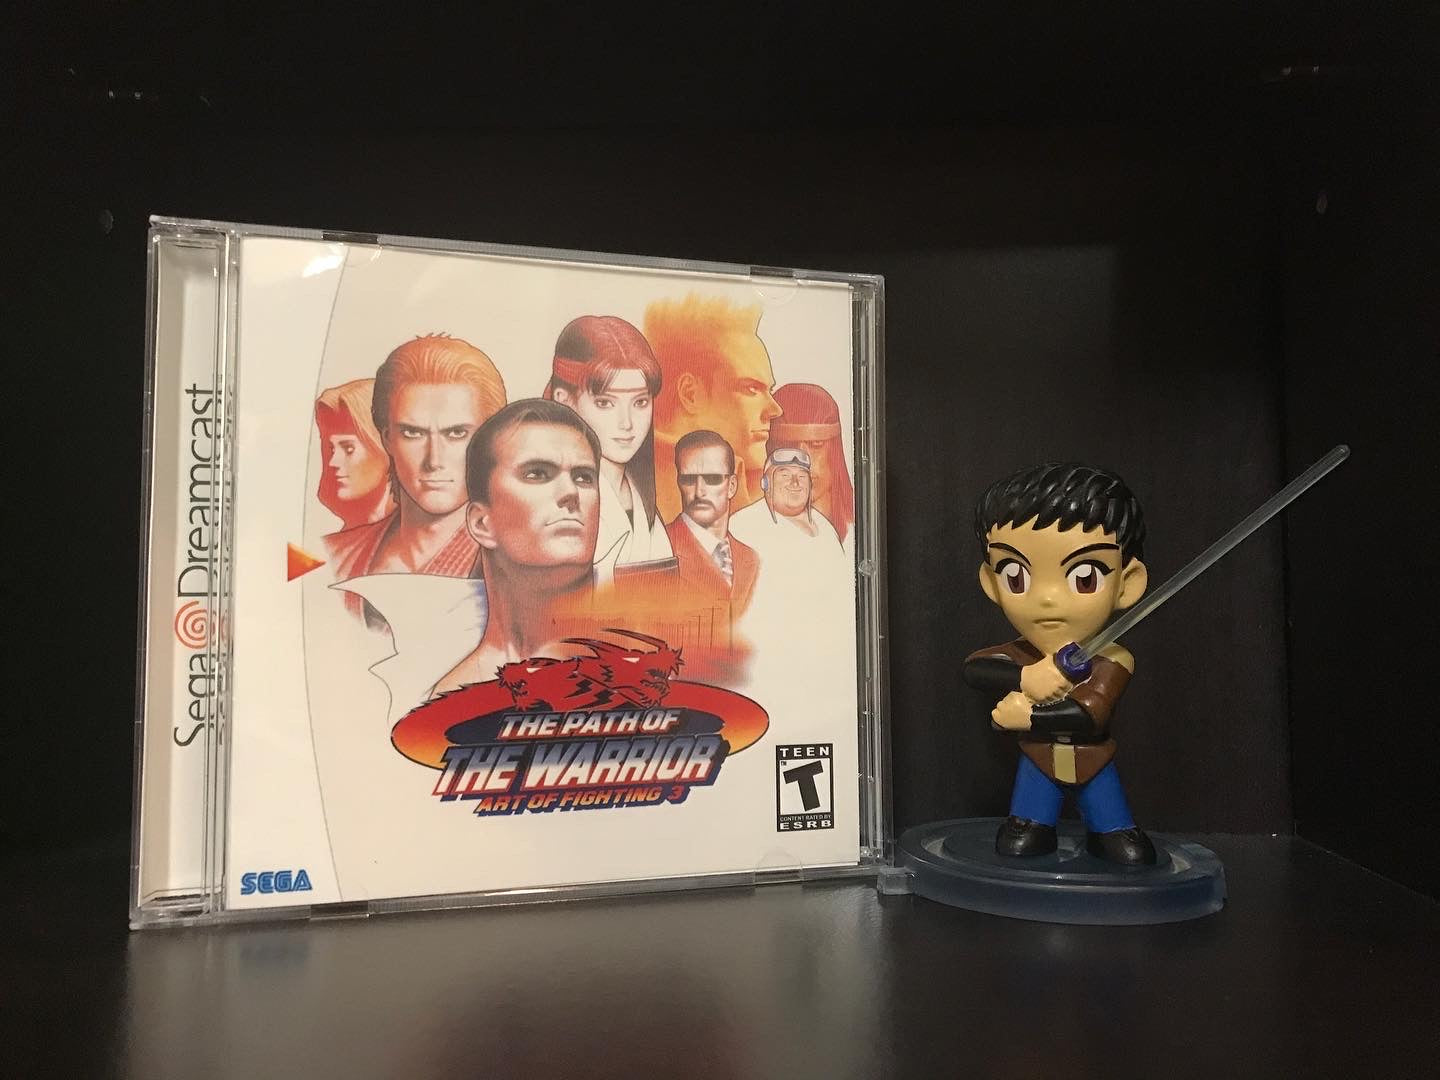 Art of Fighting 3: The Path of the Warrior [Sega Dreamcast] Reproduction